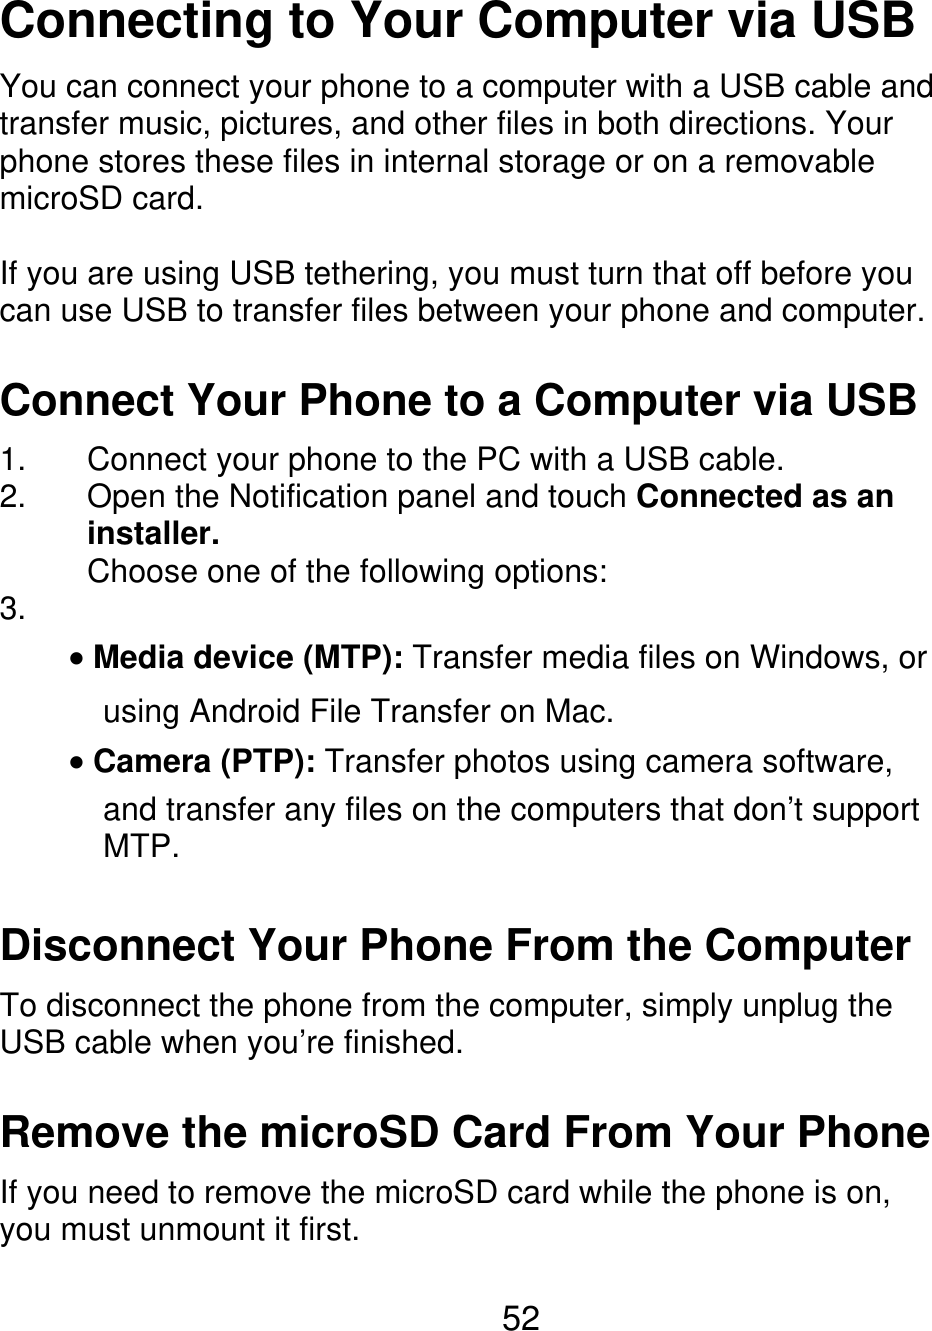 Connecting to Your Computer via USB You can connect your phone to a computer with a USB cable and transfer music, pictures, and other files in both directions. Your phone stores these files in internal storage or on a removable microSD card. If you are using USB tethering, you must turn that off before you can use USB to transfer files between your phone and computer. Connect Your Phone to a Computer via USB 1. 2. 3. Connect your phone to the PC with a USB cable. Open the Notification panel and touch Connected as an installer. Choose one of the following options: Media device (MTP): Transfer media files on Windows, or using Android File Transfer on Mac. Camera (PTP): Transfer photos using camera software, and transfer any files on the computers that don’t support MTP. Disconnect Your Phone From the Computer To disconnect the phone from the computer, simply unplug the USB cable when you’re finished. Remove the microSD Card From Your Phone If you need to remove the microSD card while the phone is on, you must unmount it first. 52 